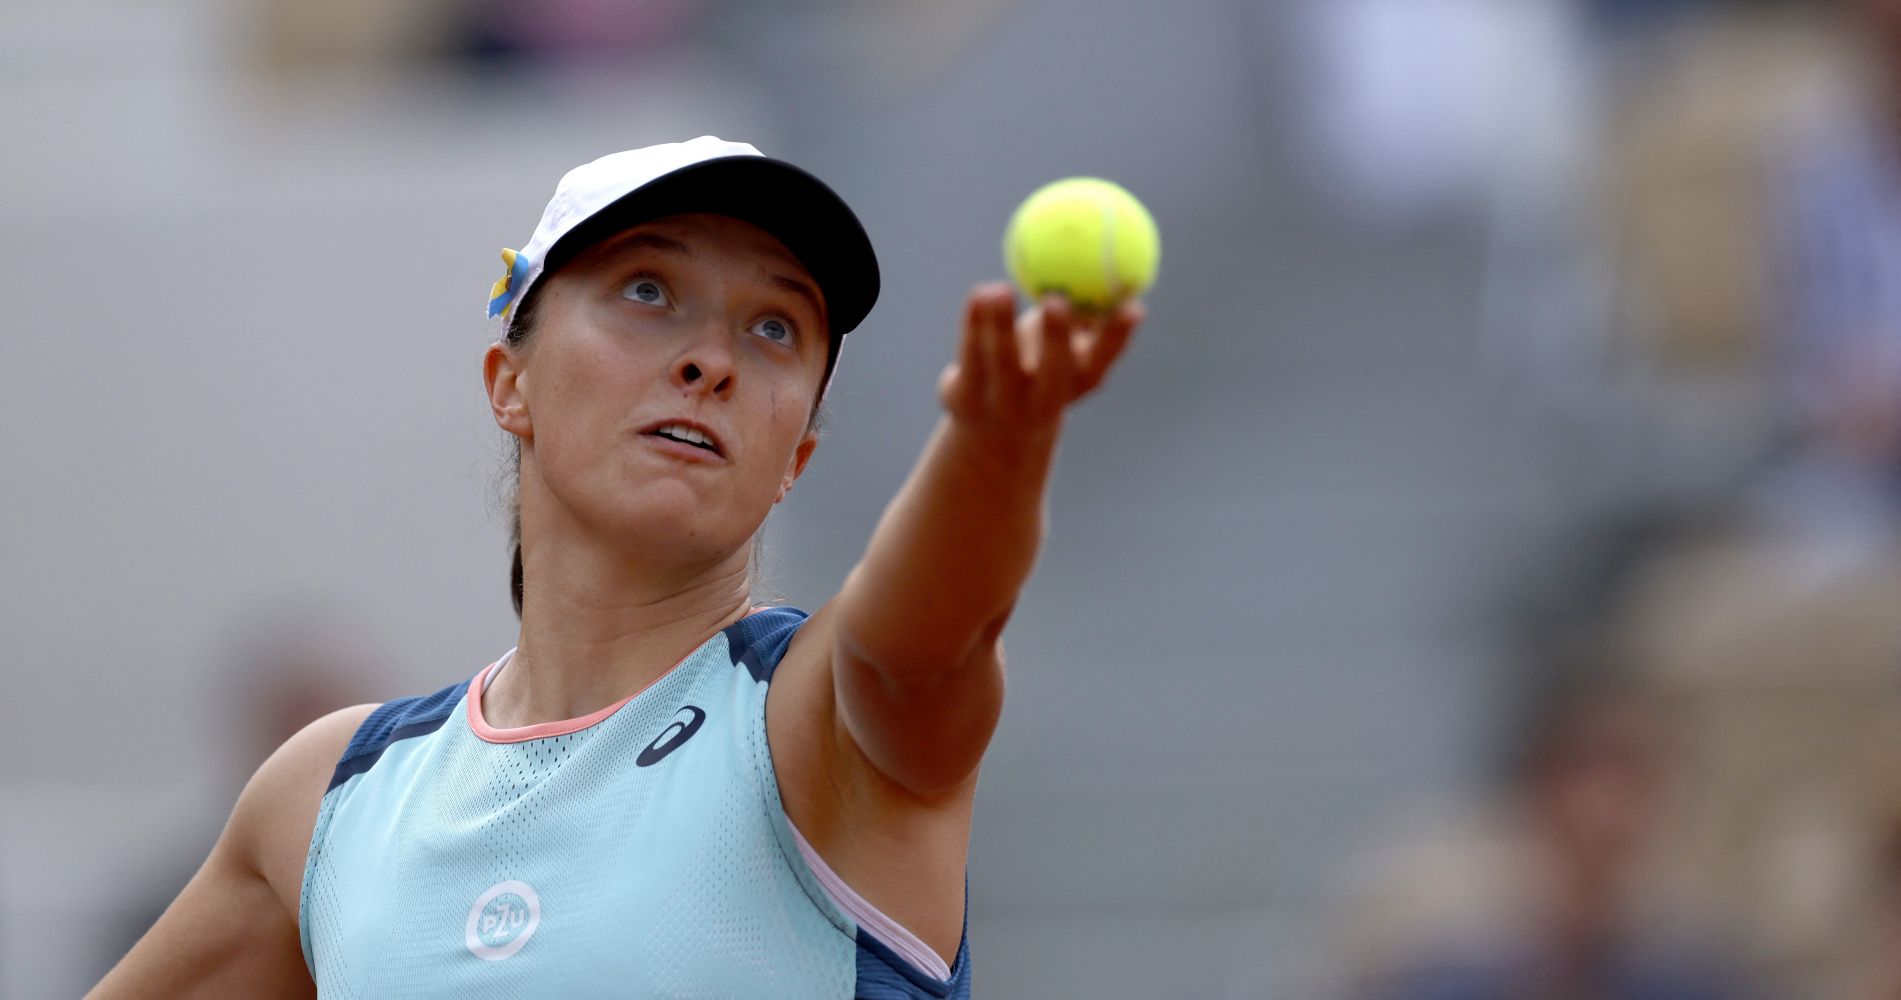 Poland's Iga Swiatek in action at the French Open